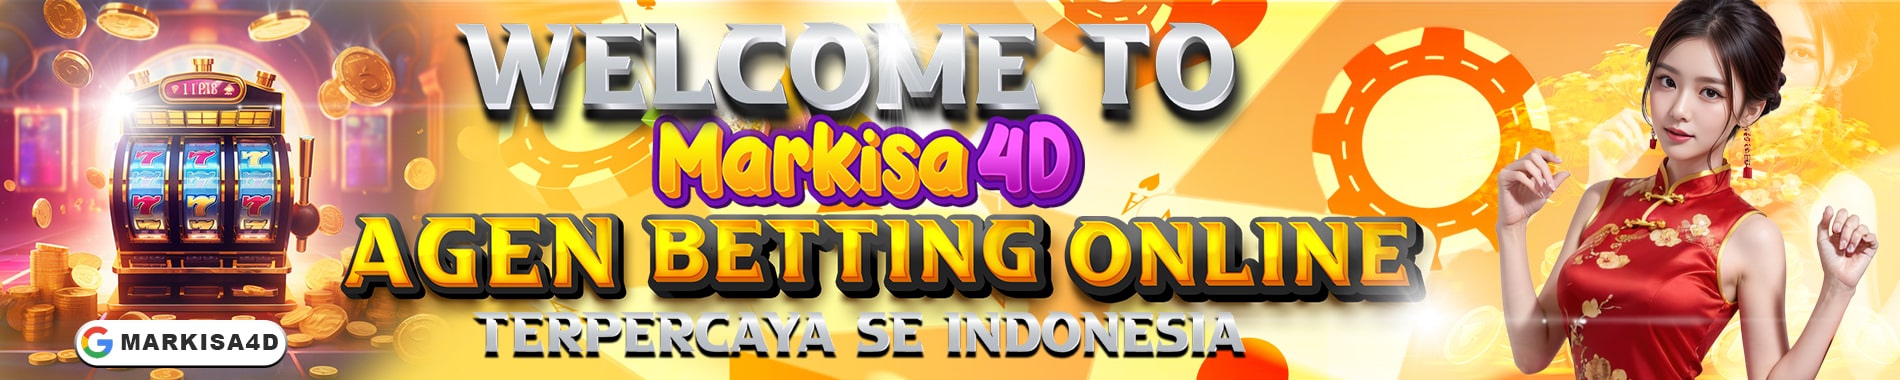 WELCOME TO MARKISA4D